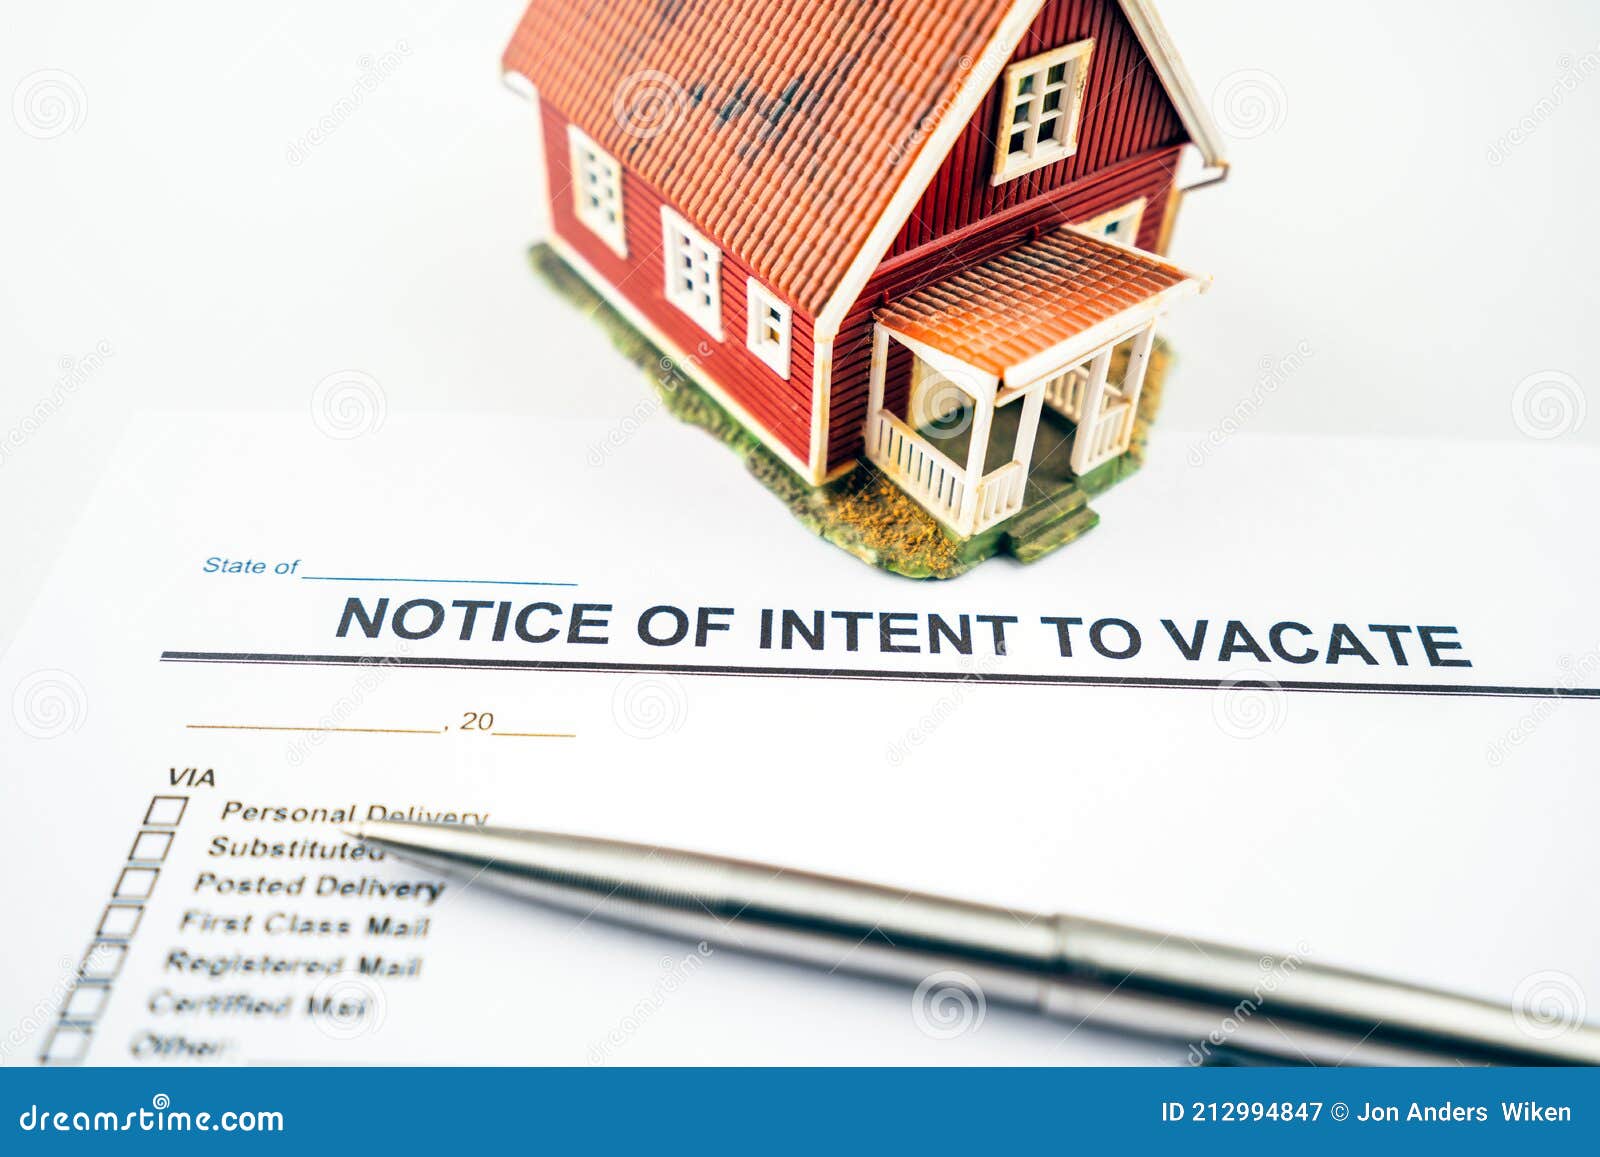 notice of intent to vacate letter and pen